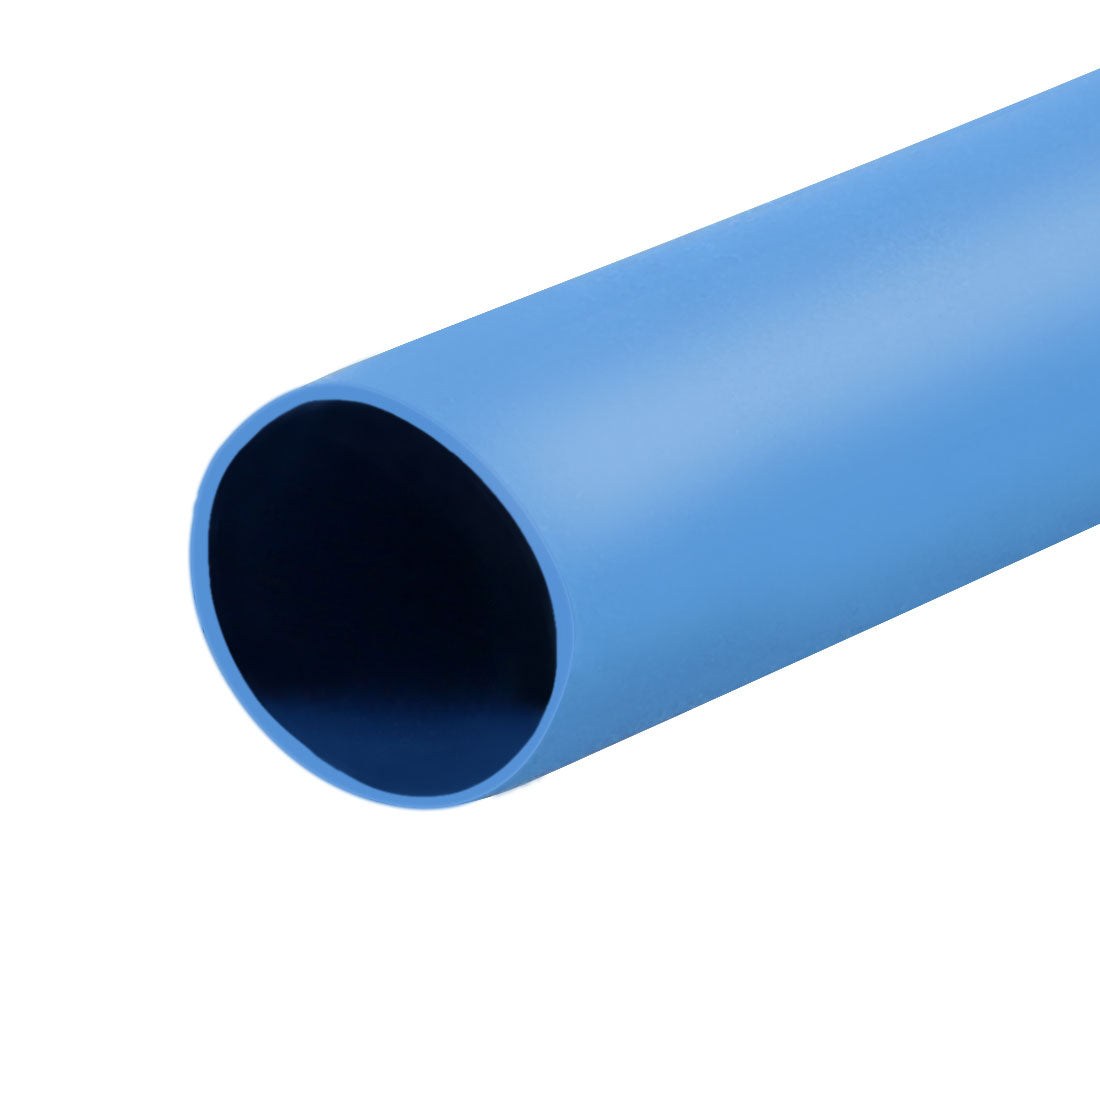 uxcell Uxcell Heat Shrink Tube 2:1 Electrical Insulation Tube Wire Cable Tubing Sleeving Wrap Blue 4mm Diameter 1m Long